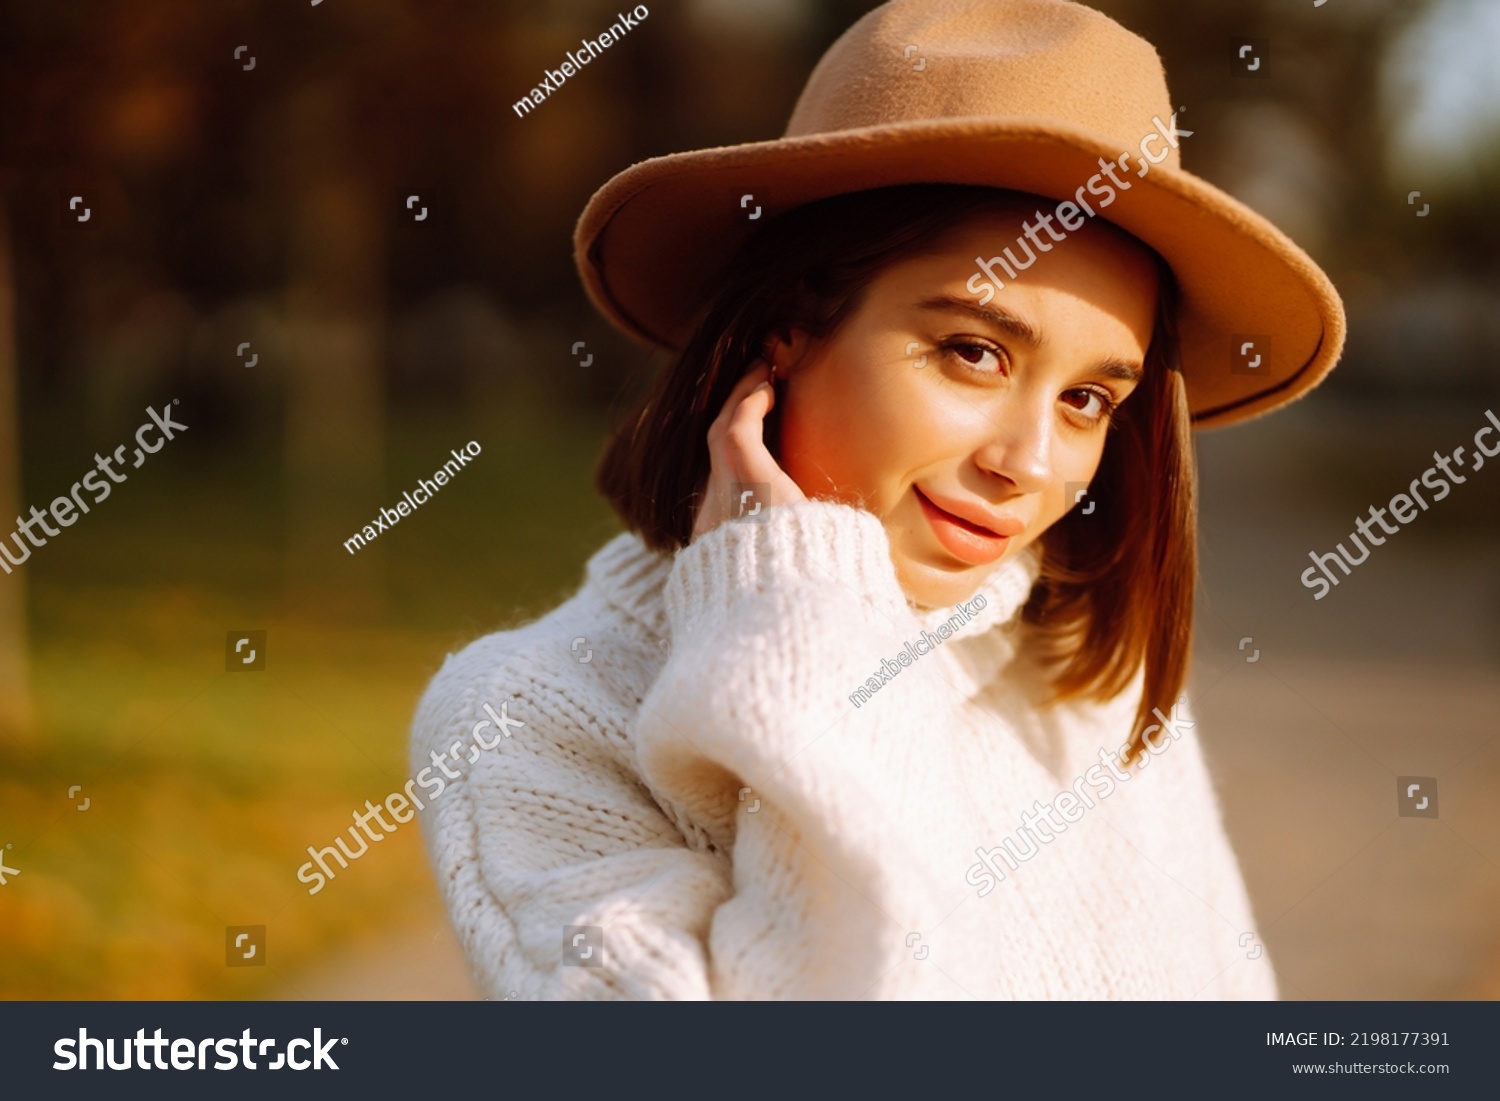 Stylish woman enjoying autumn weather outdoor. Fashion, style concept. People, lifestyle, relaxation and vacations concept. #2198177391